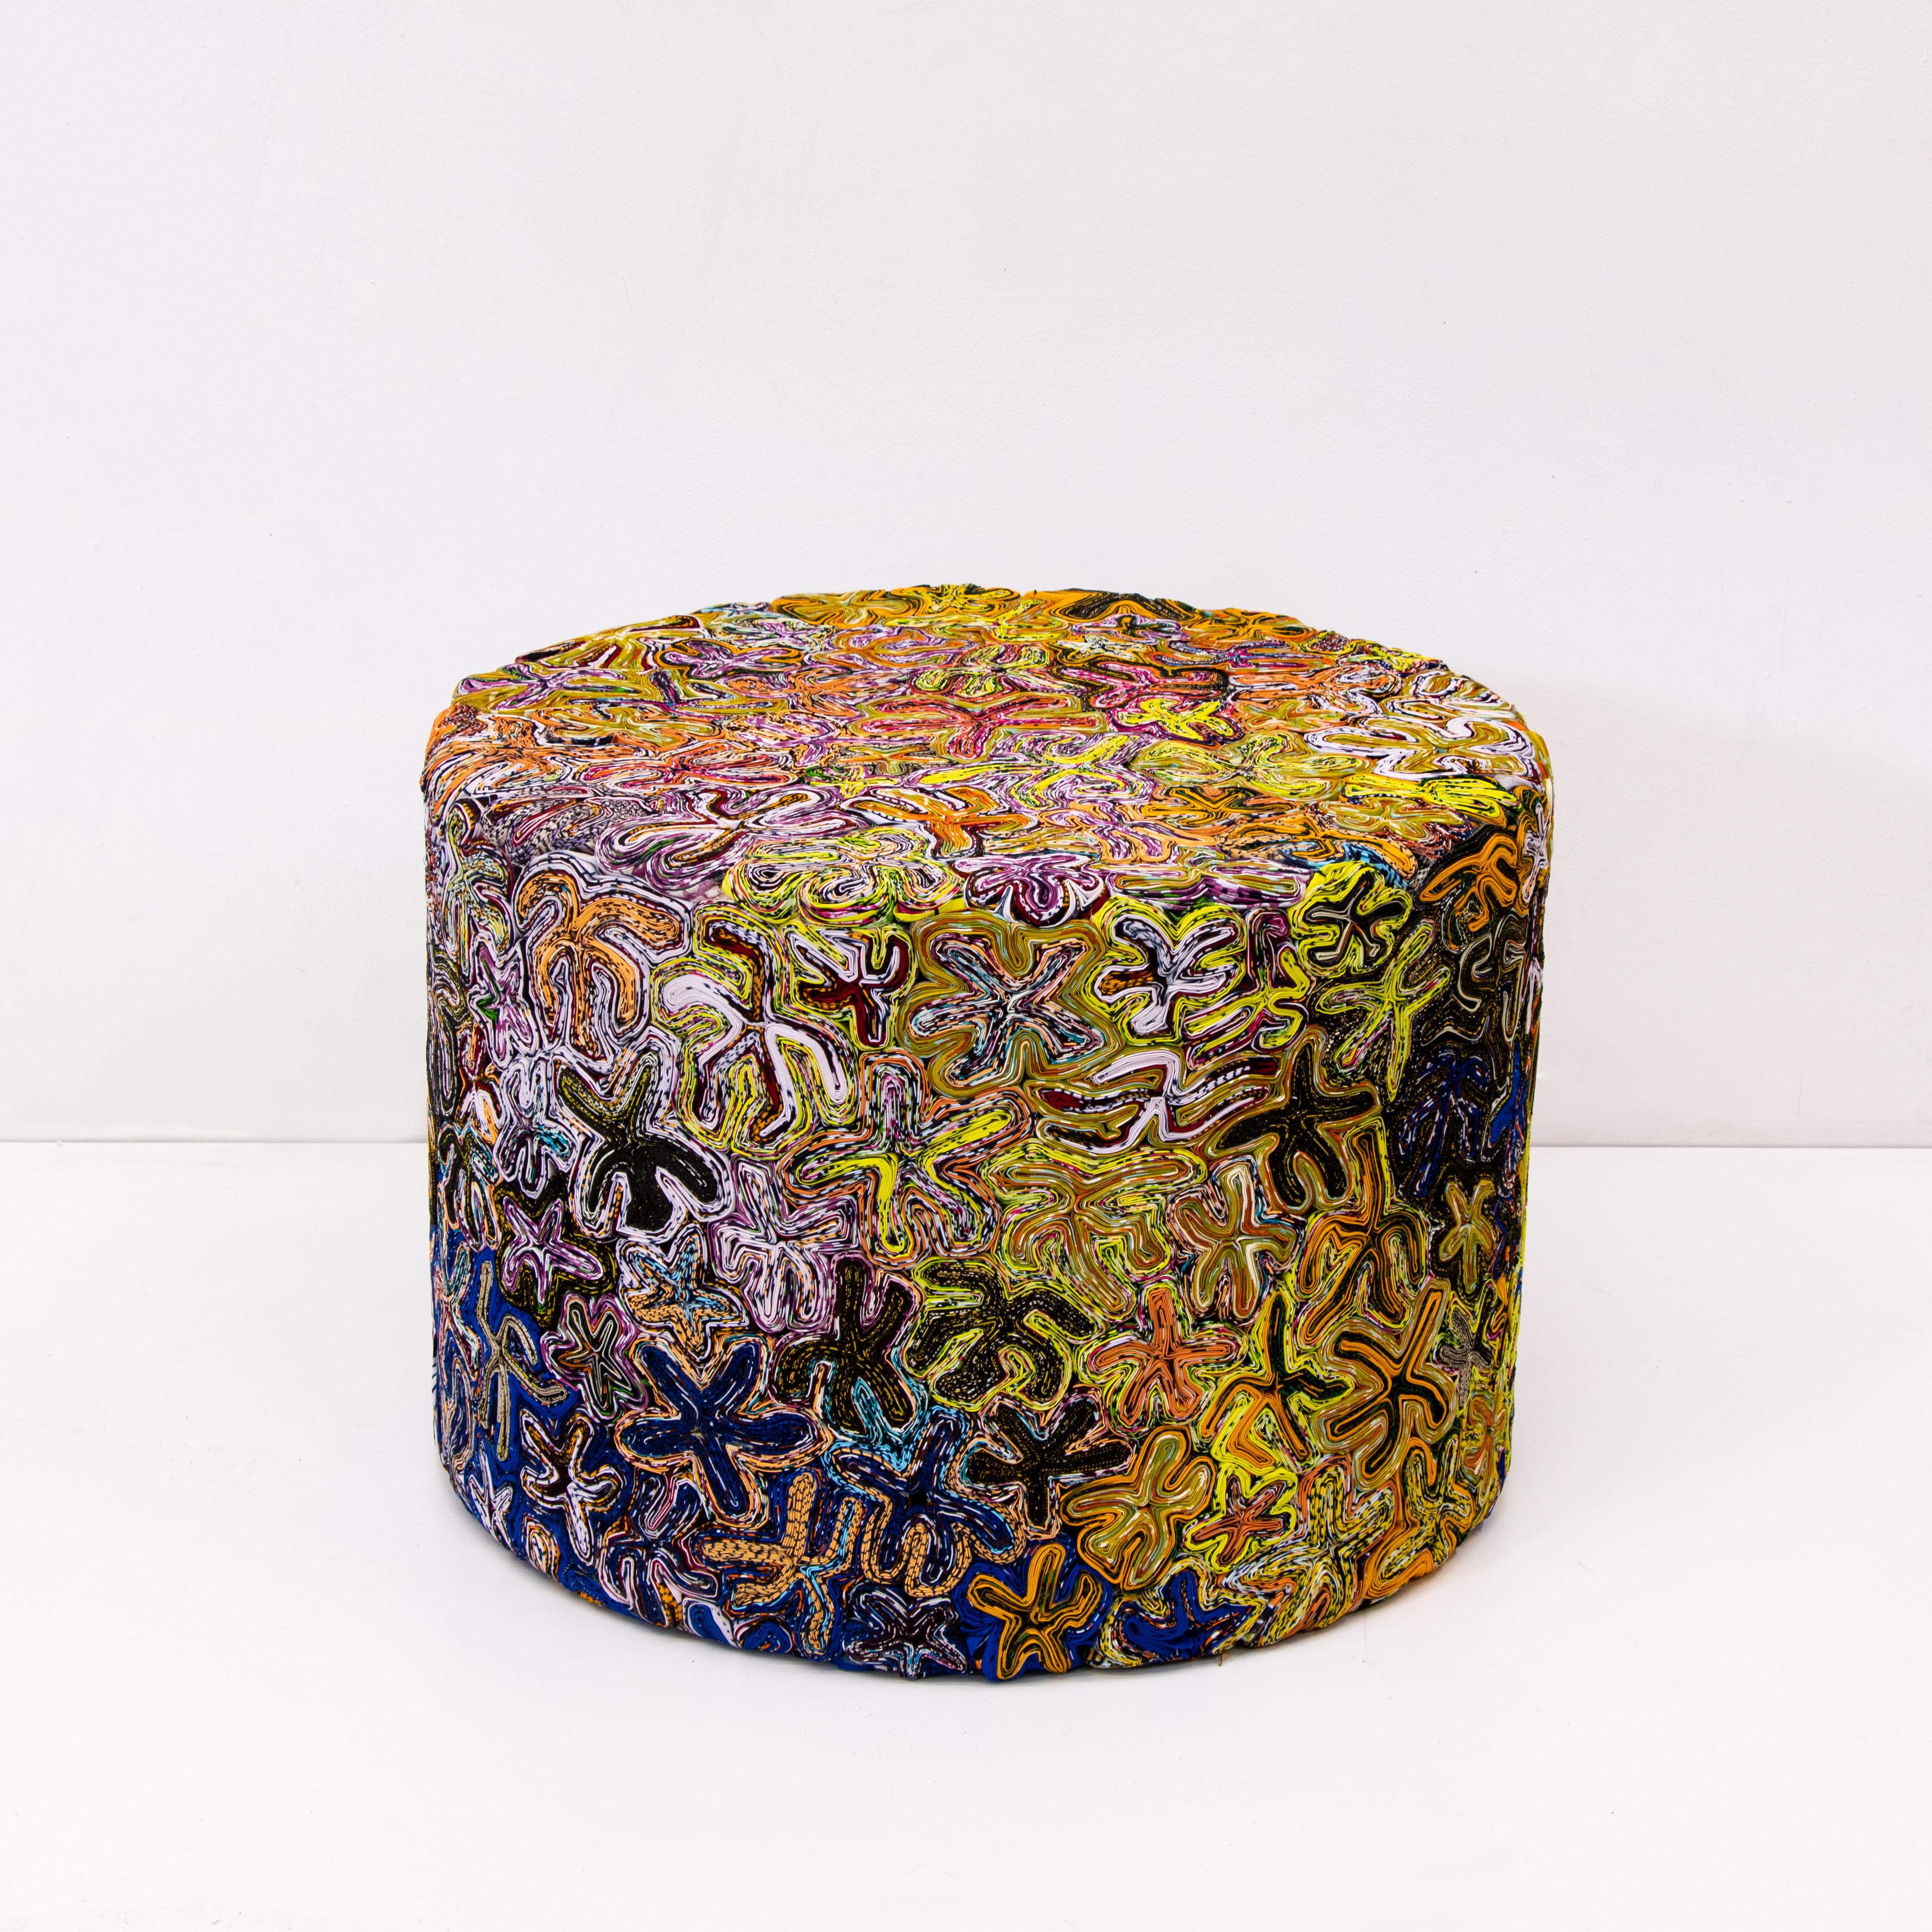 Studio Simone post - large soft stool - flower navel.

Made out of 100%cotton waxed, Vlisco textile rejects.
Simone Post took the Vlisco material one step further towards 3D objects. She covered multiple objects with Vlisco left over textiles,